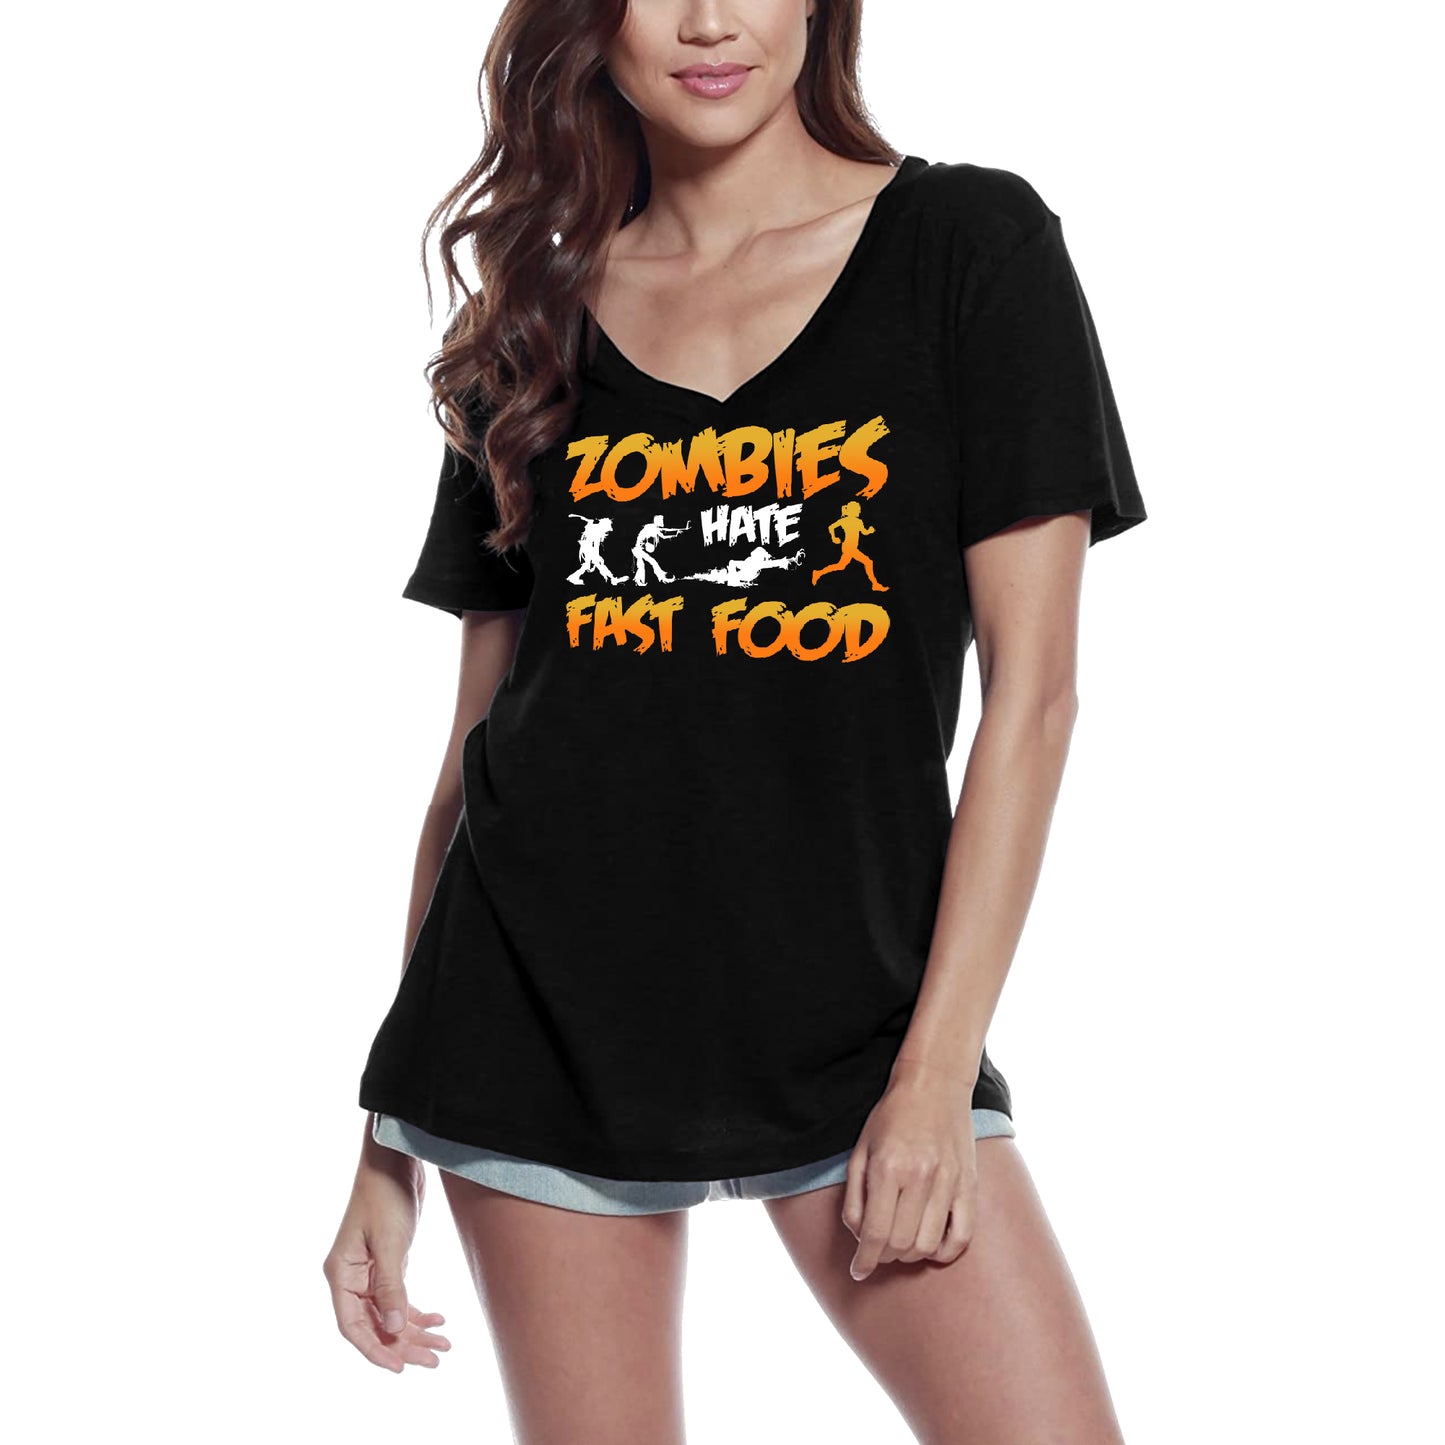 ULTRABASIC Women's T-Shirt Zombies Hates Fast Food - Funny Vintage Tee Shirt